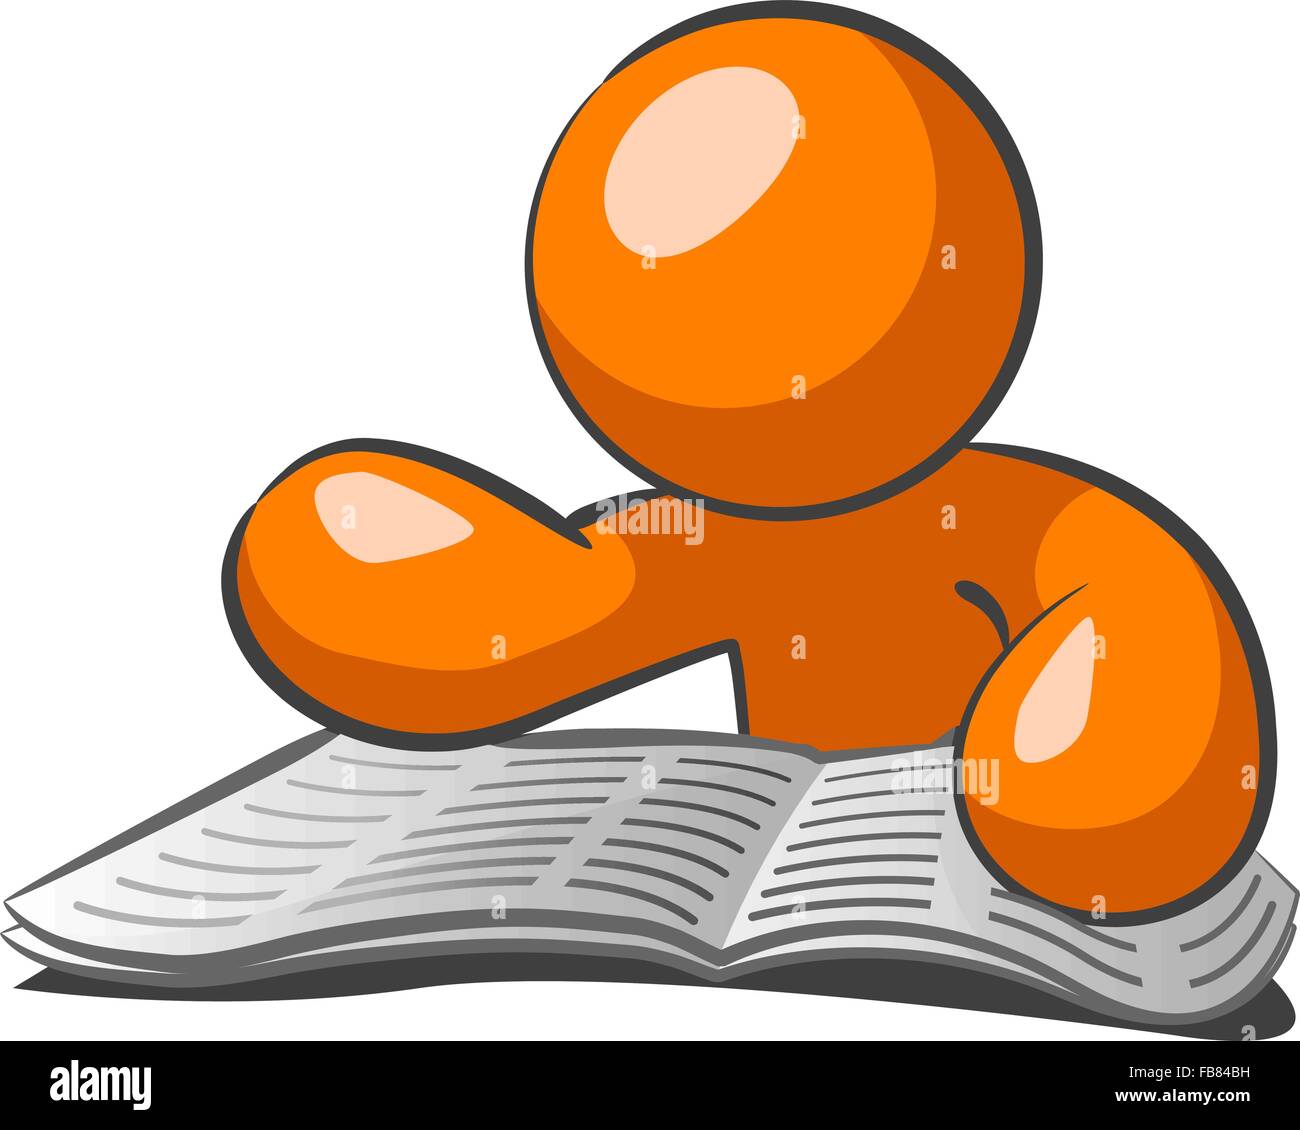 Orange man browsing the want ads, looking for a job in this very challenged economy. Stock Vector